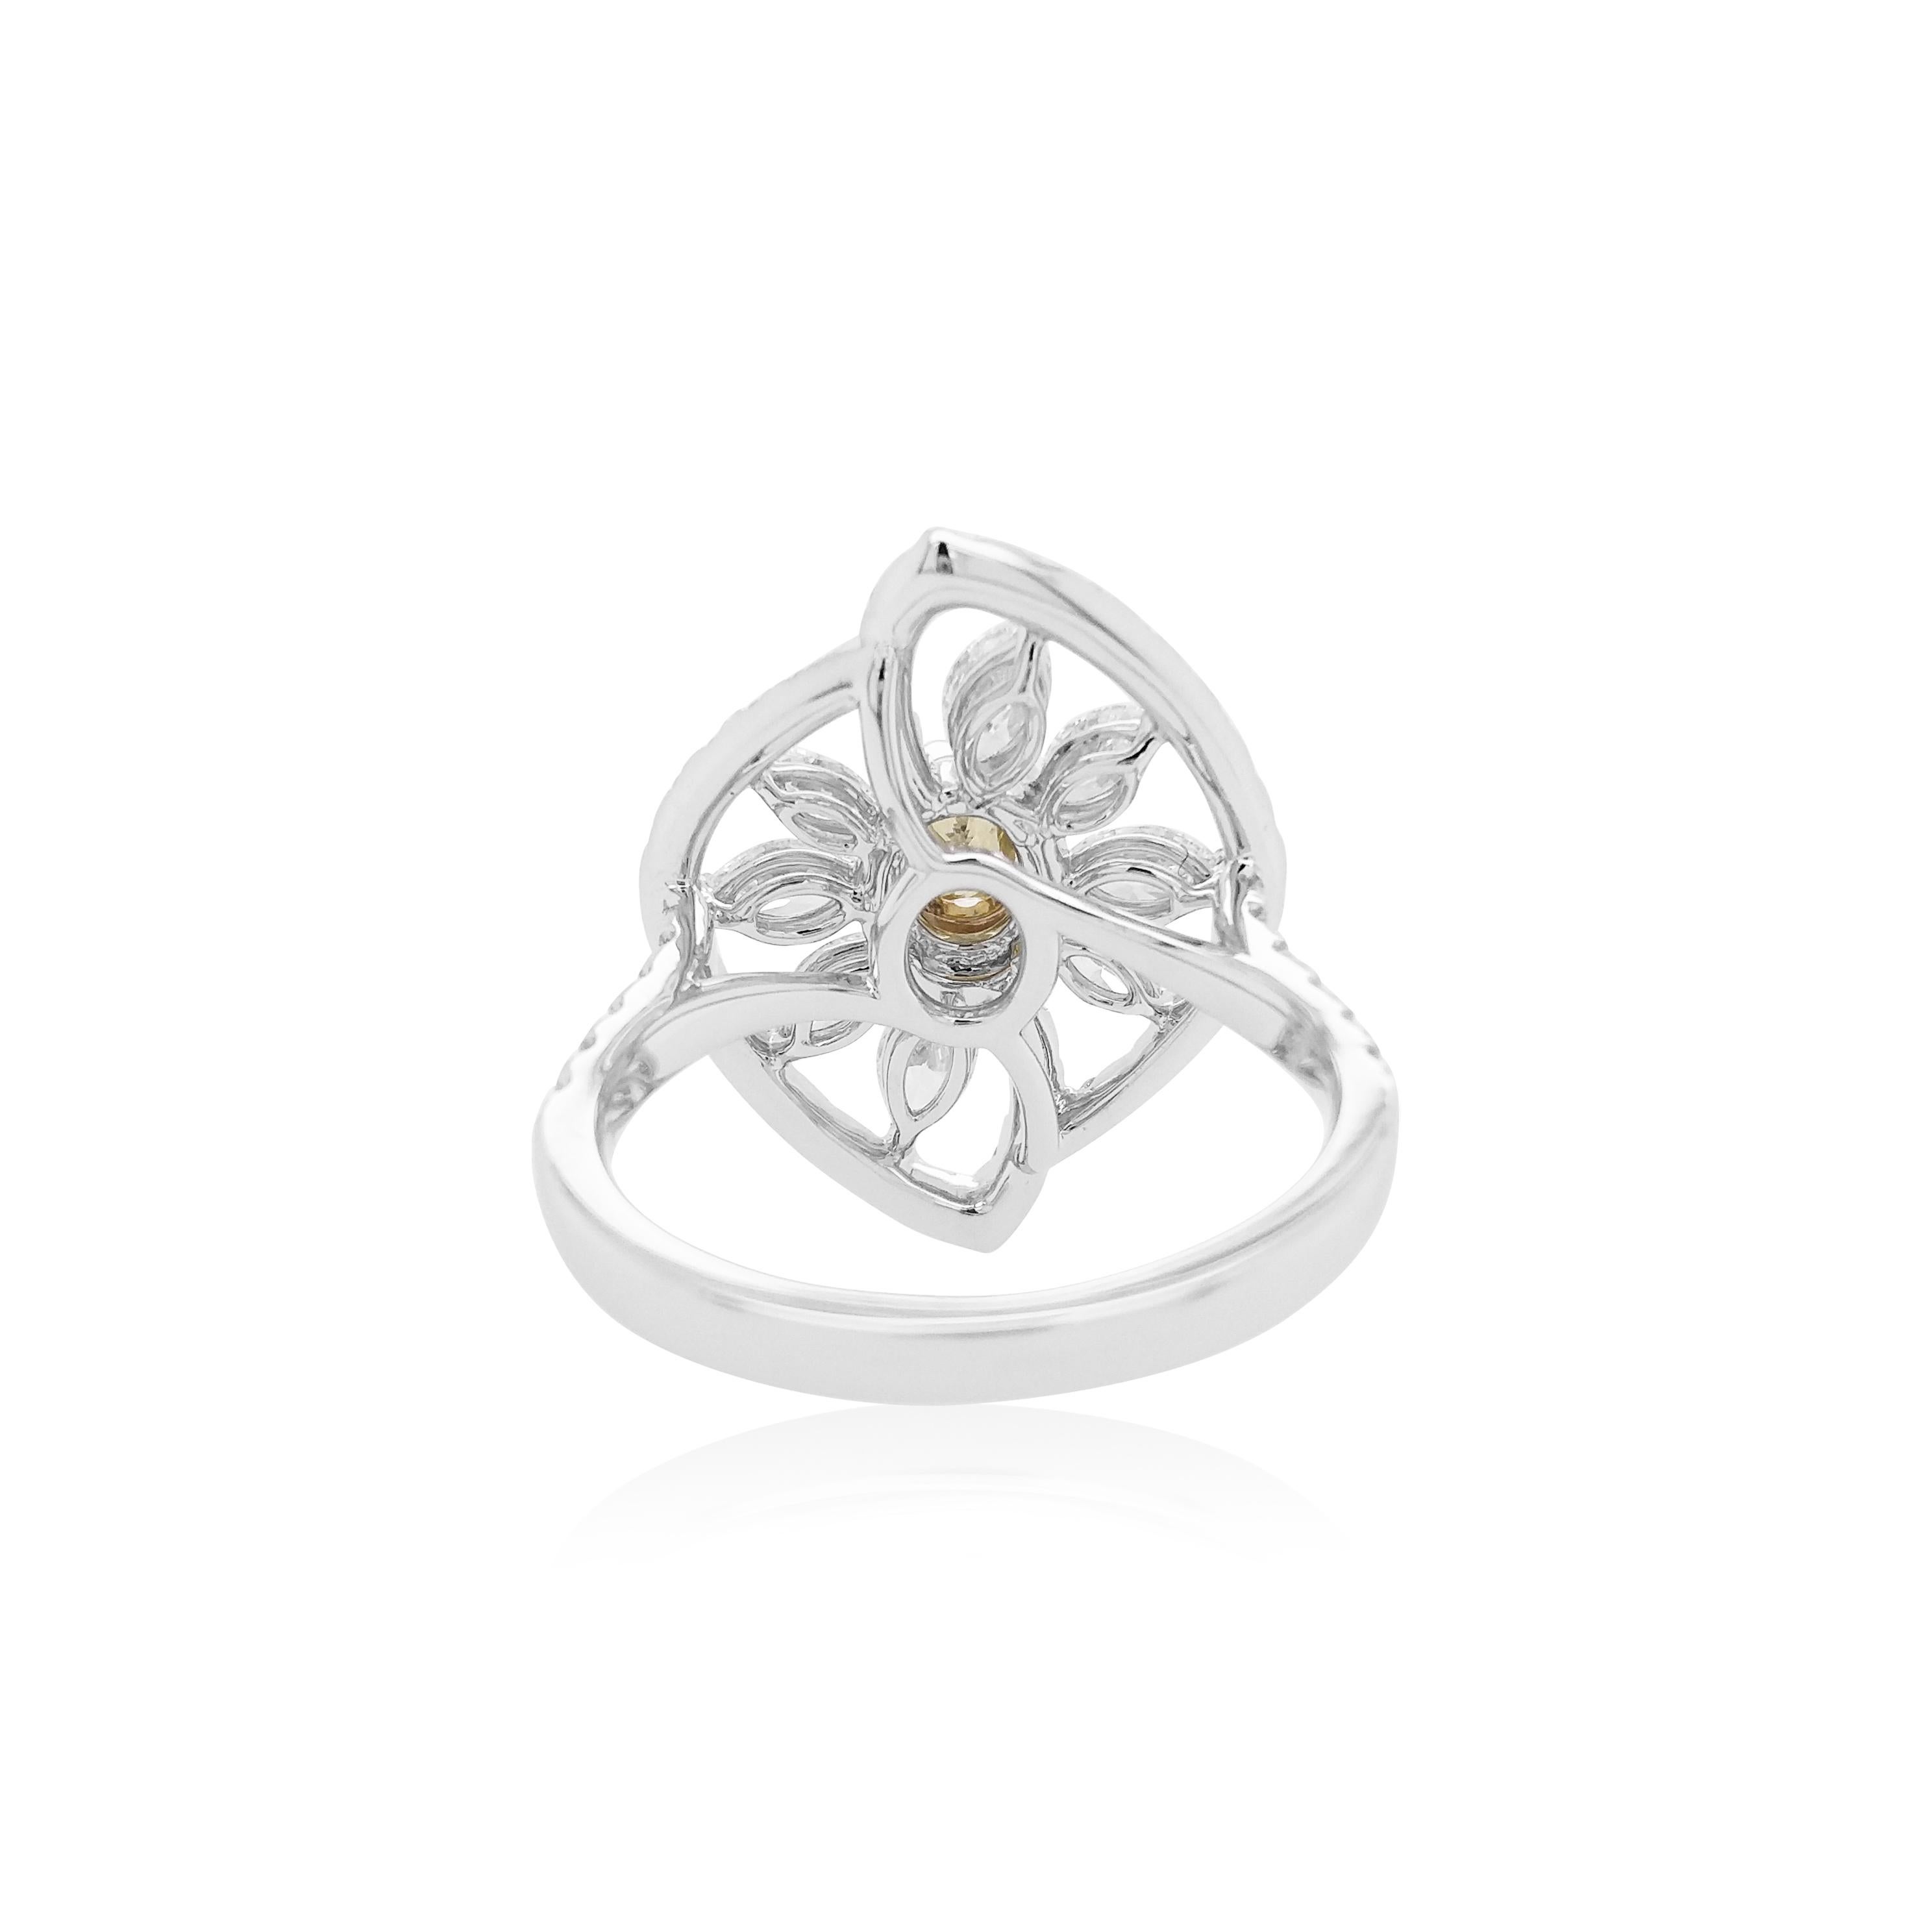 This striking 18K gold ring features beautiful Yellow diamond at the centre, surrounded by a bold pattern of marquise and round diamonds which enables the light to sparkle in a unique way. Set in luxurious 18 Karat white and yellow gold to provide a